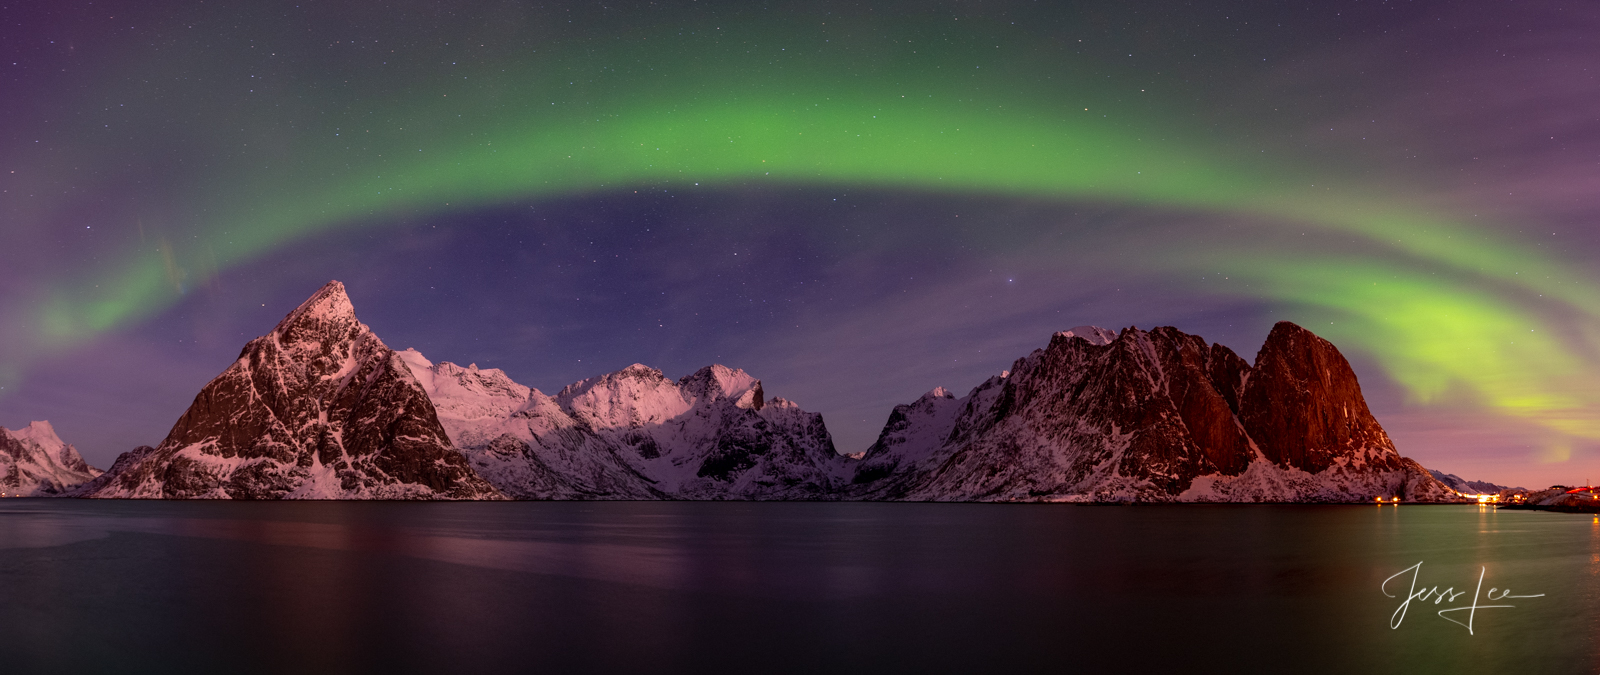 Limited Edition of 50 Exclusive high-resolution Museum Quality Fine Art Prints of Norway Aurora. Photos copyright © Jess Lee